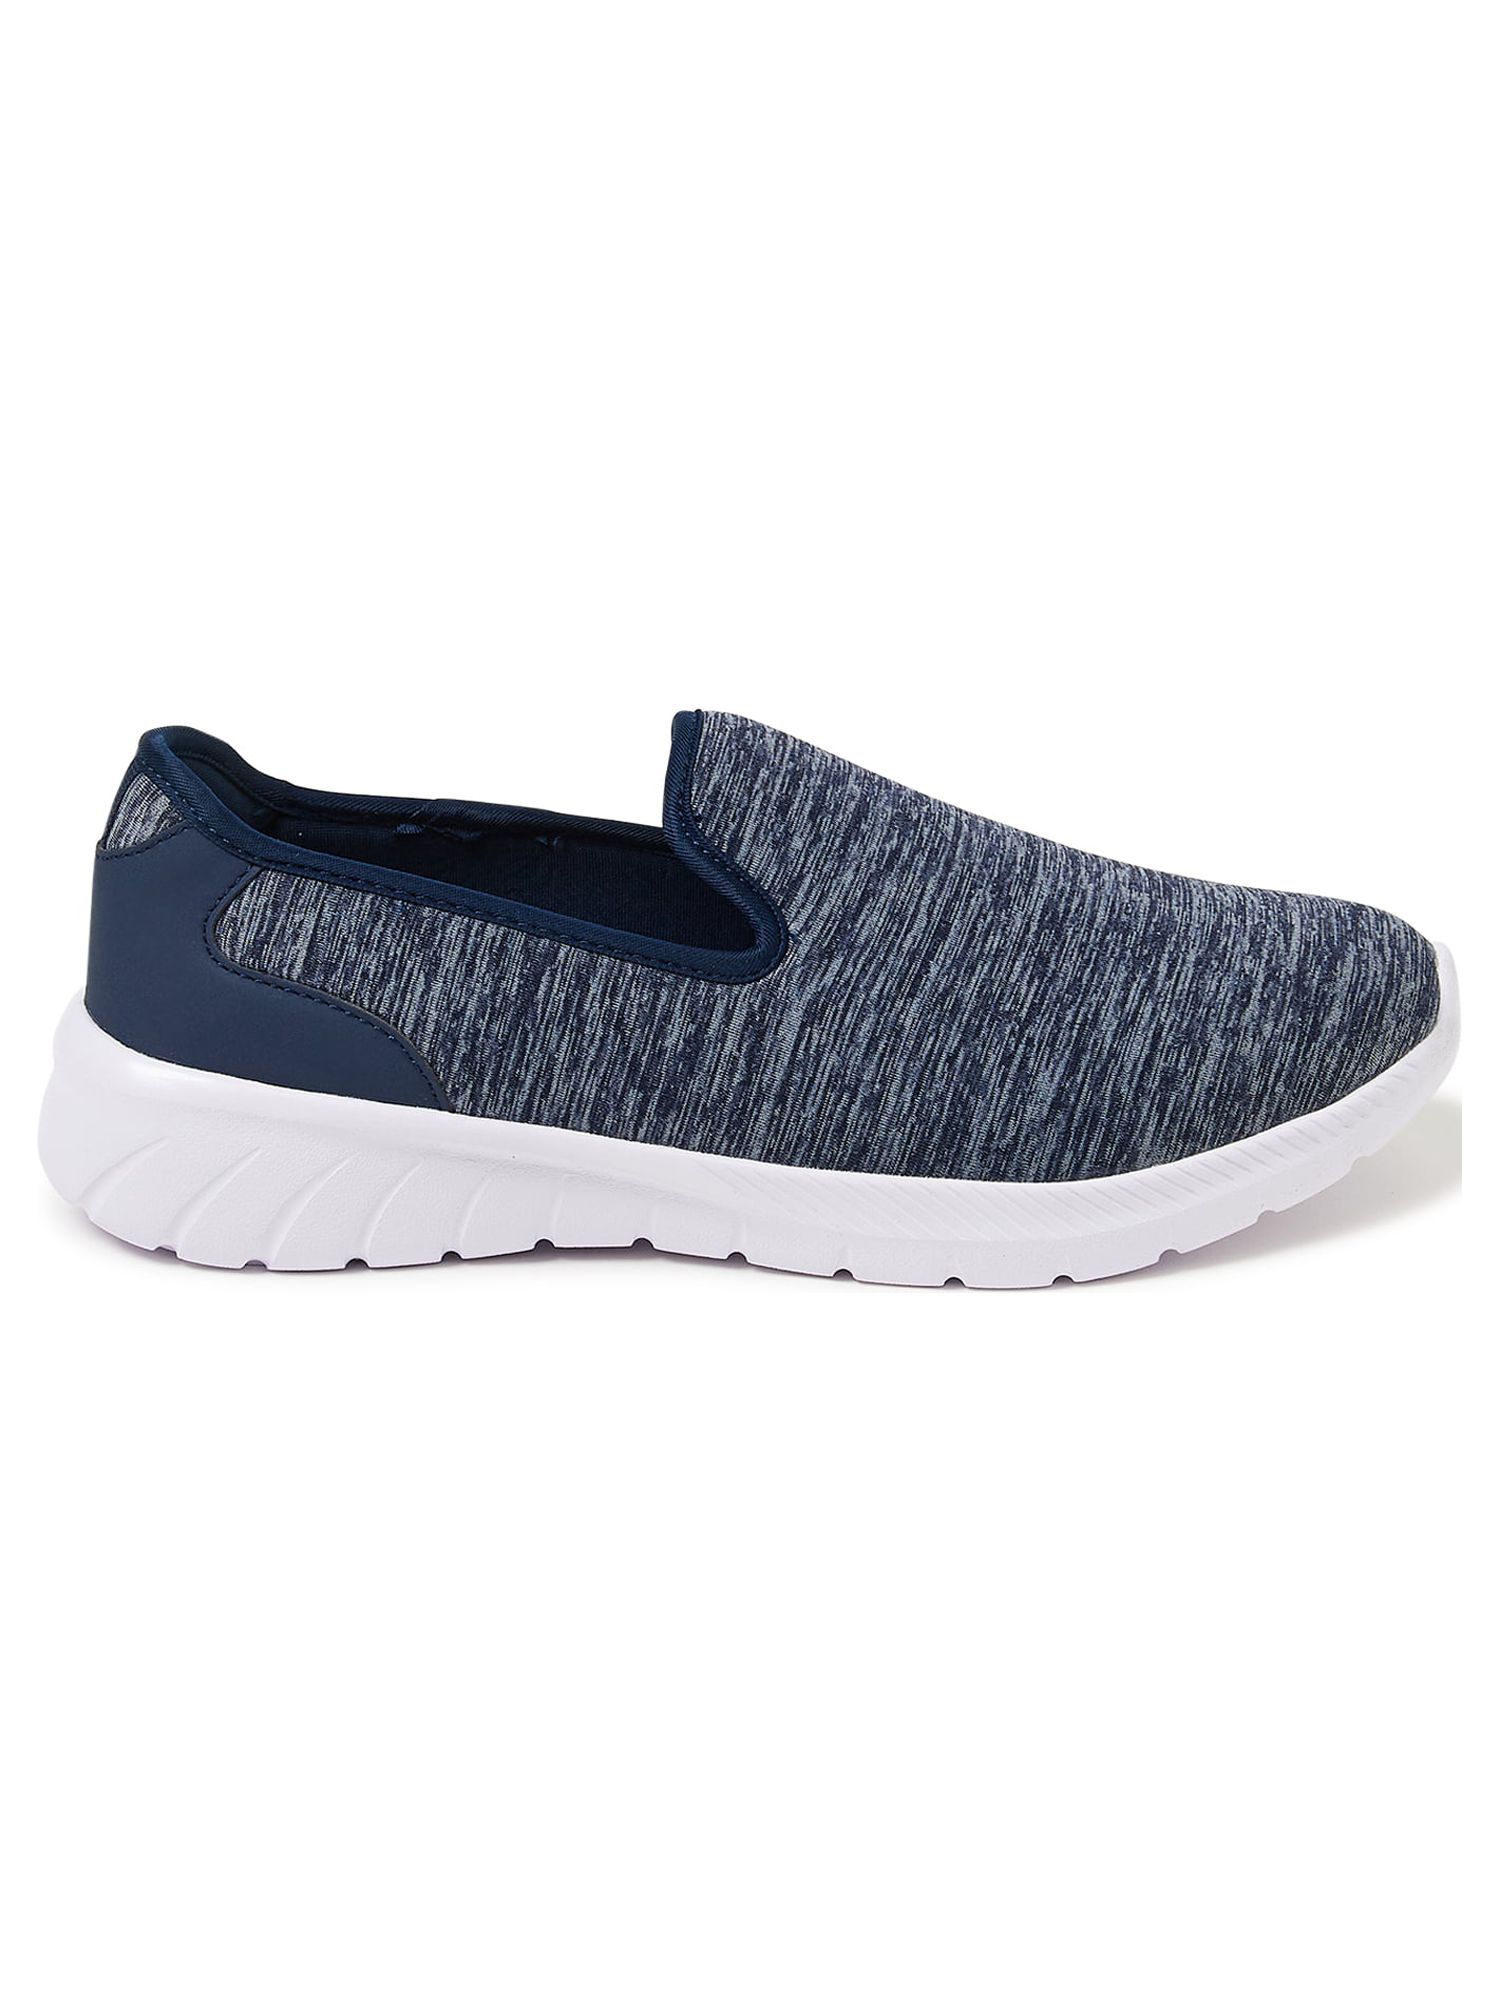 Athletic Works Women's Slip-On Sneakers (Wide Width Available) - image 2 of 6